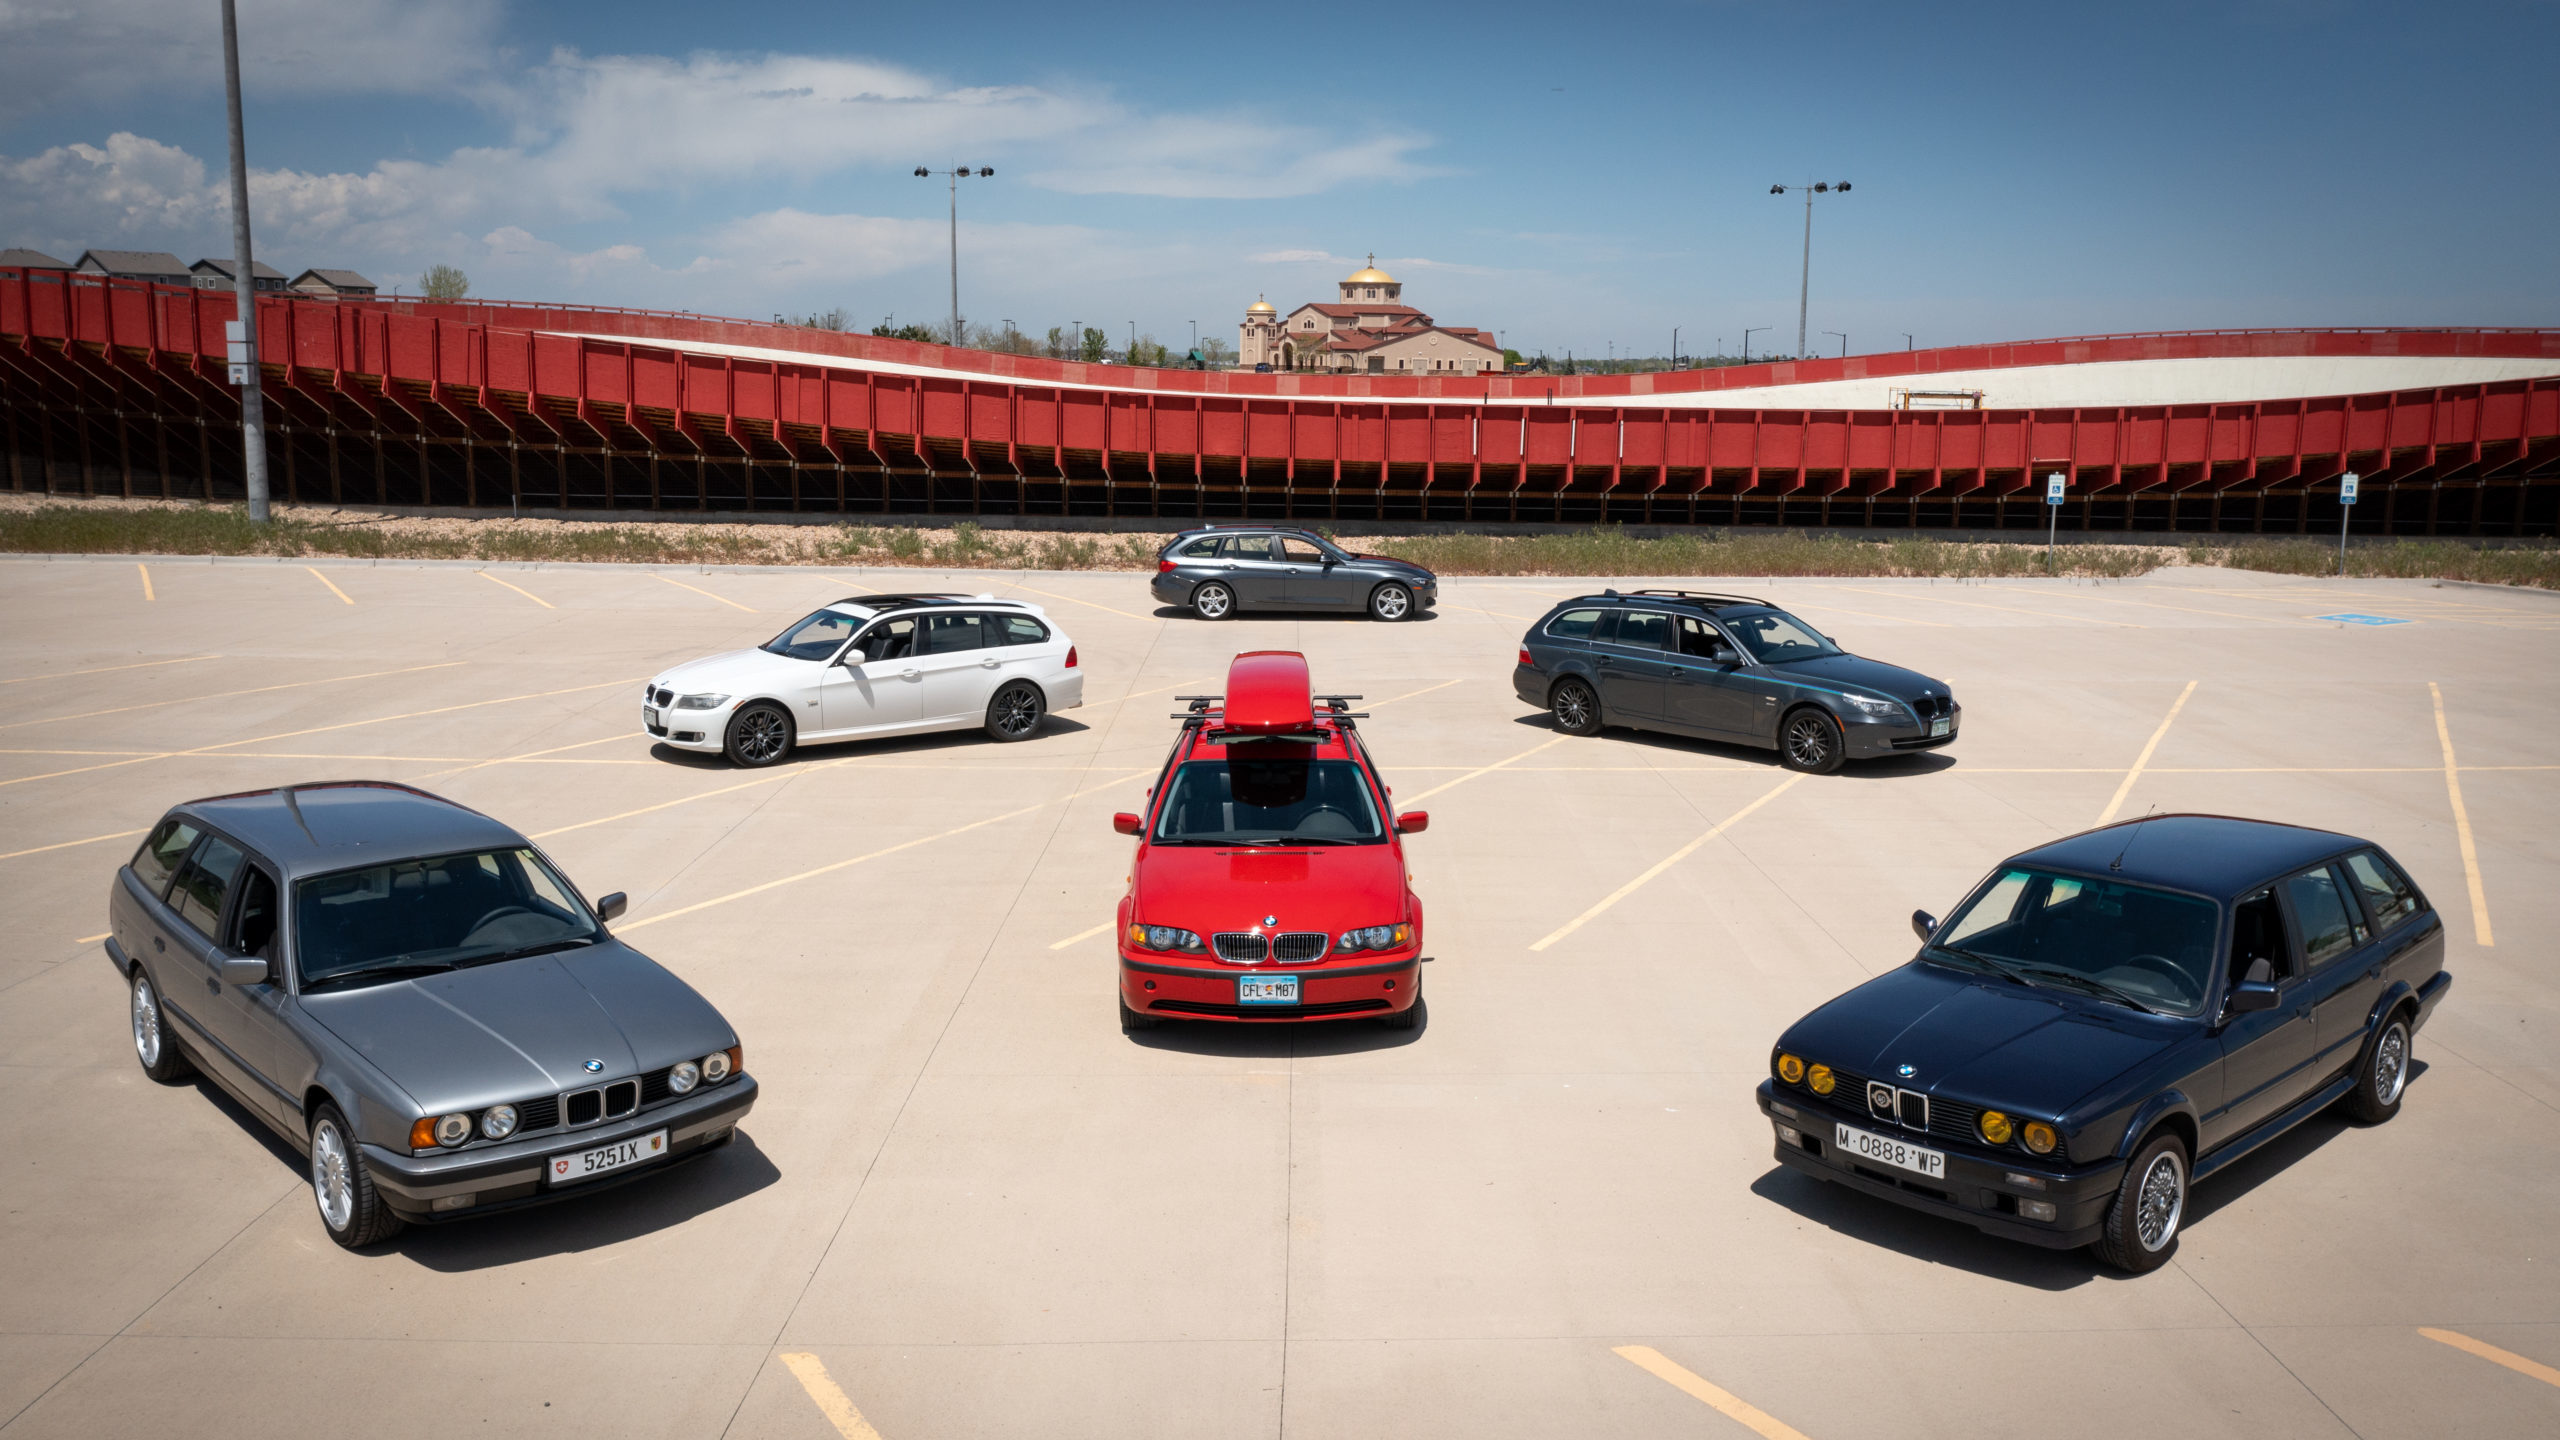 The E91 Wagon Is Perfection - BimmerLife